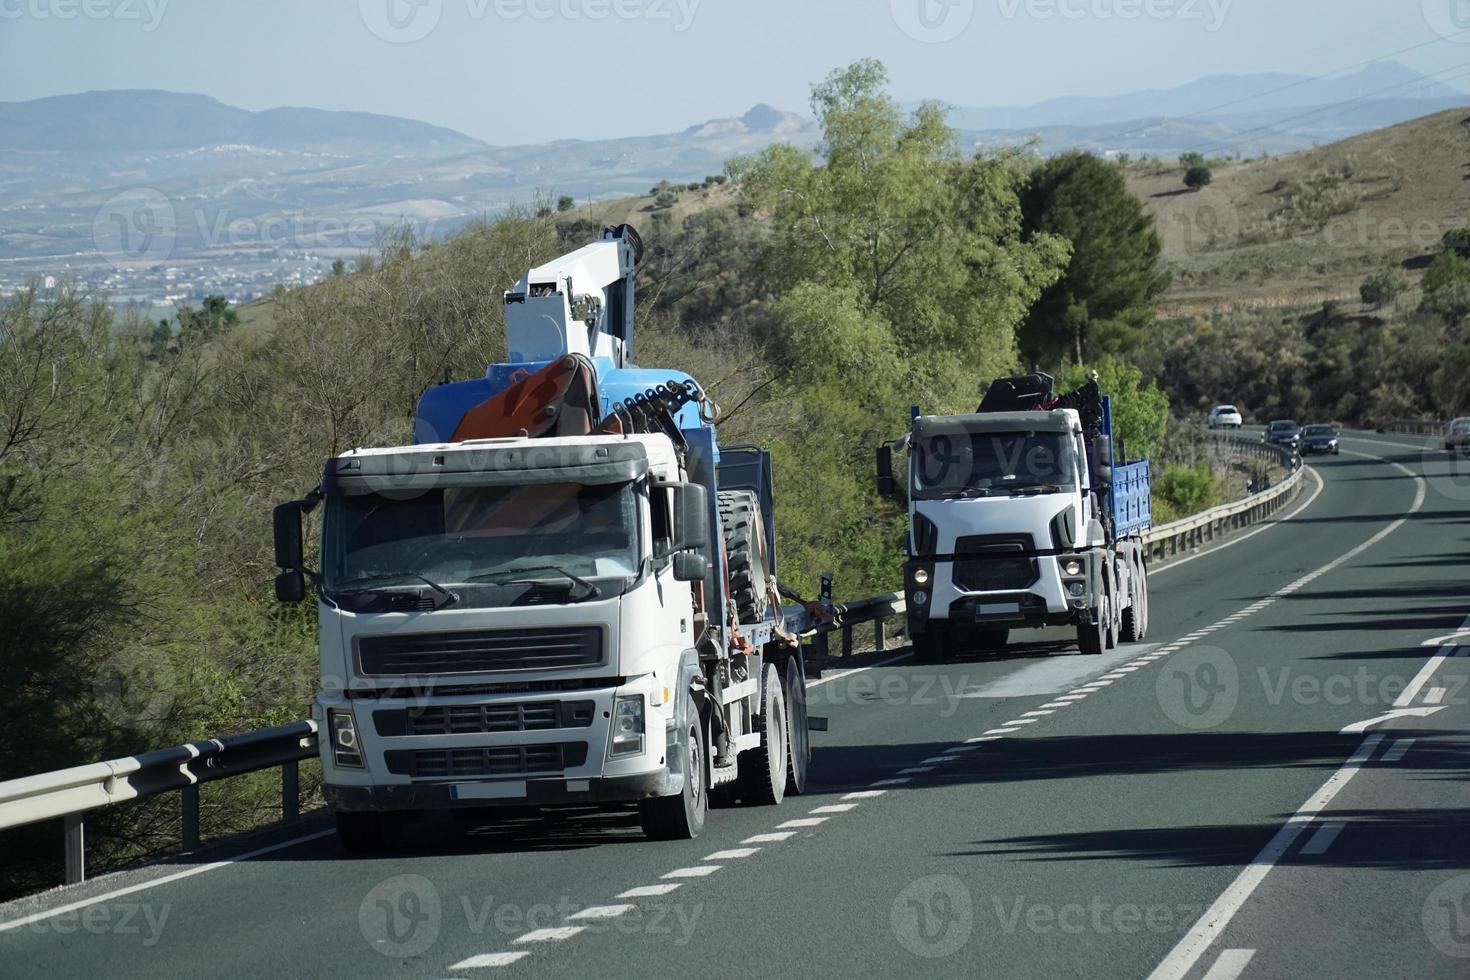 Two Trucks With Construction Equipment on a Road - Front View photo